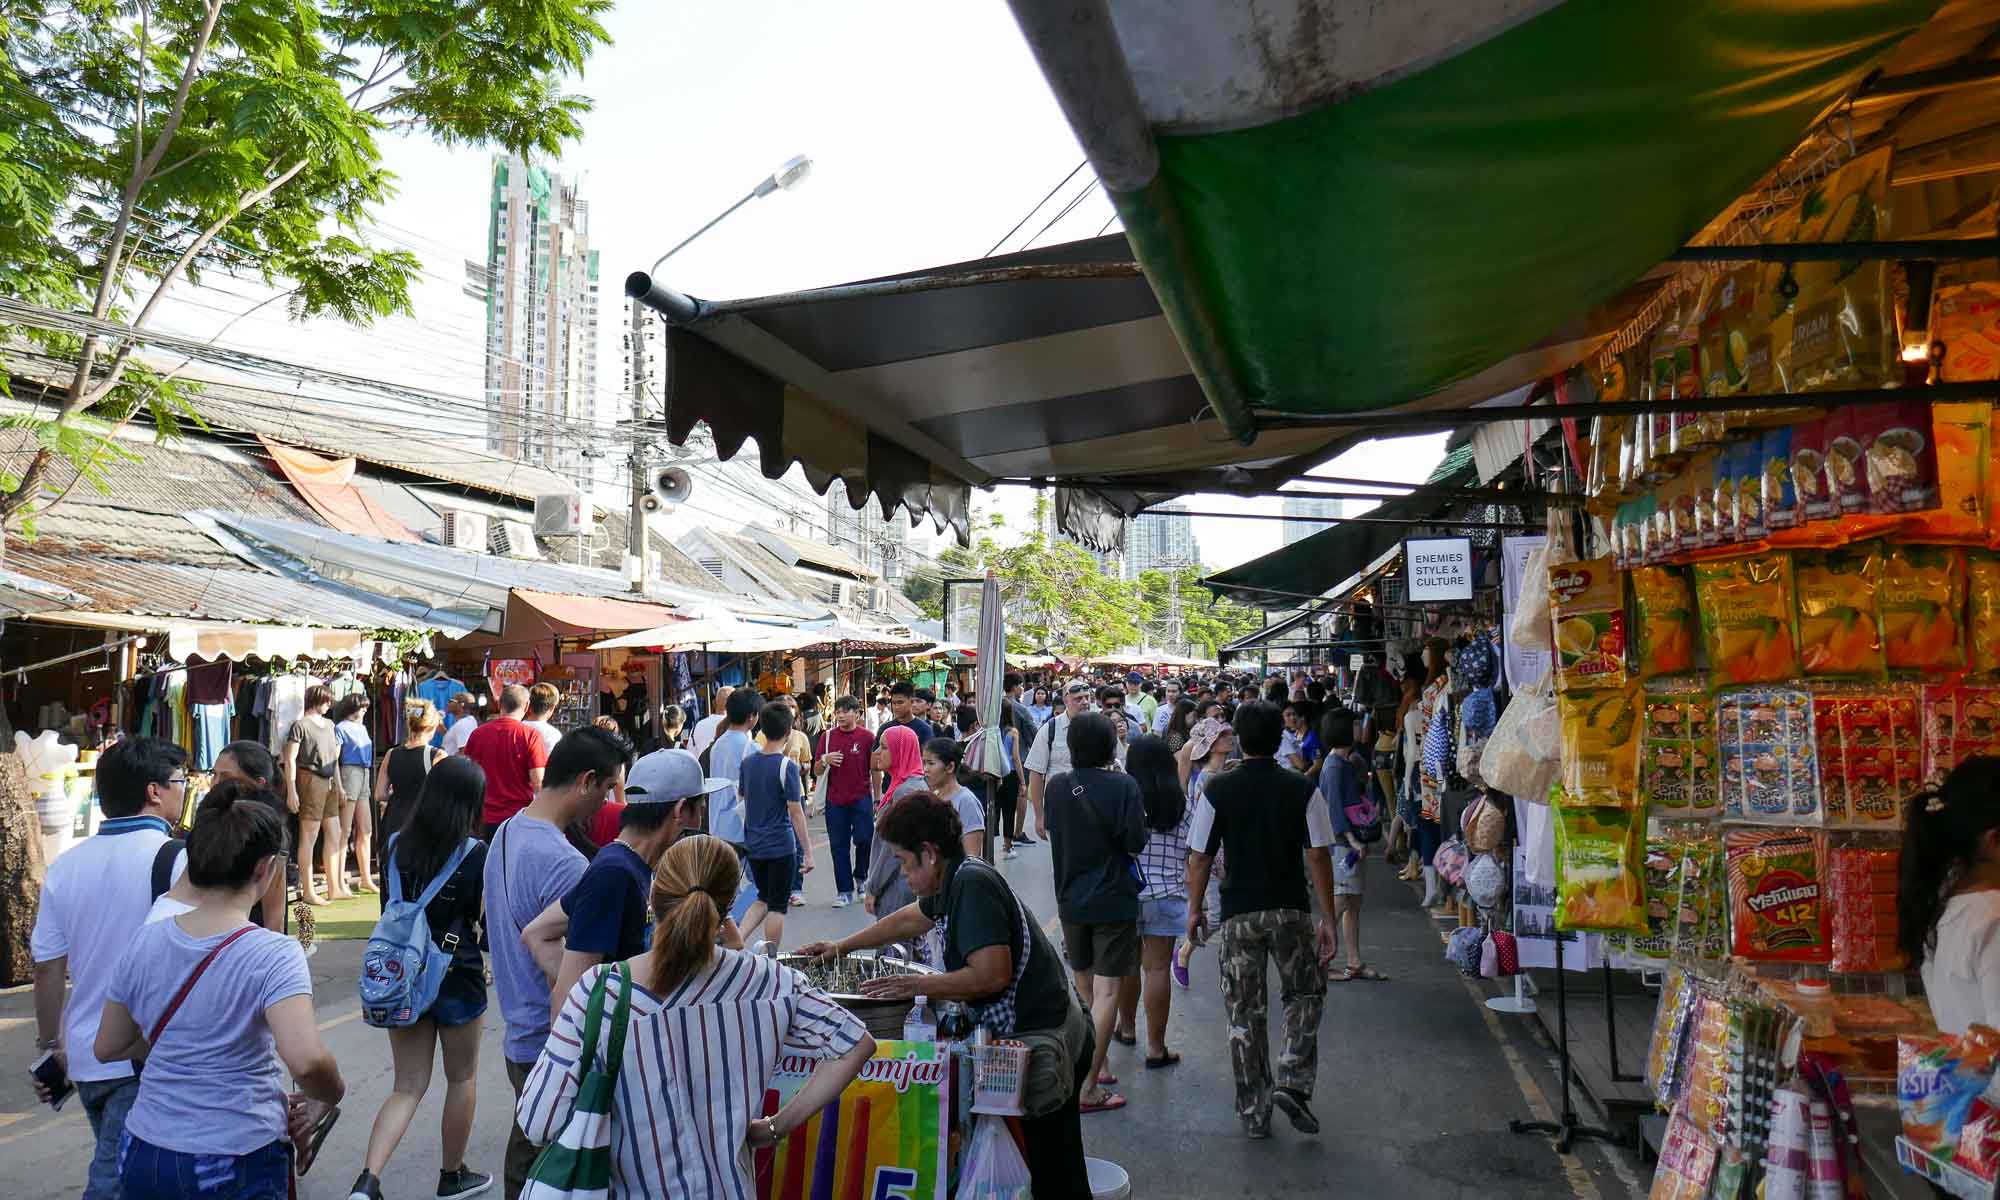 The market is huge with stalls inside and outside